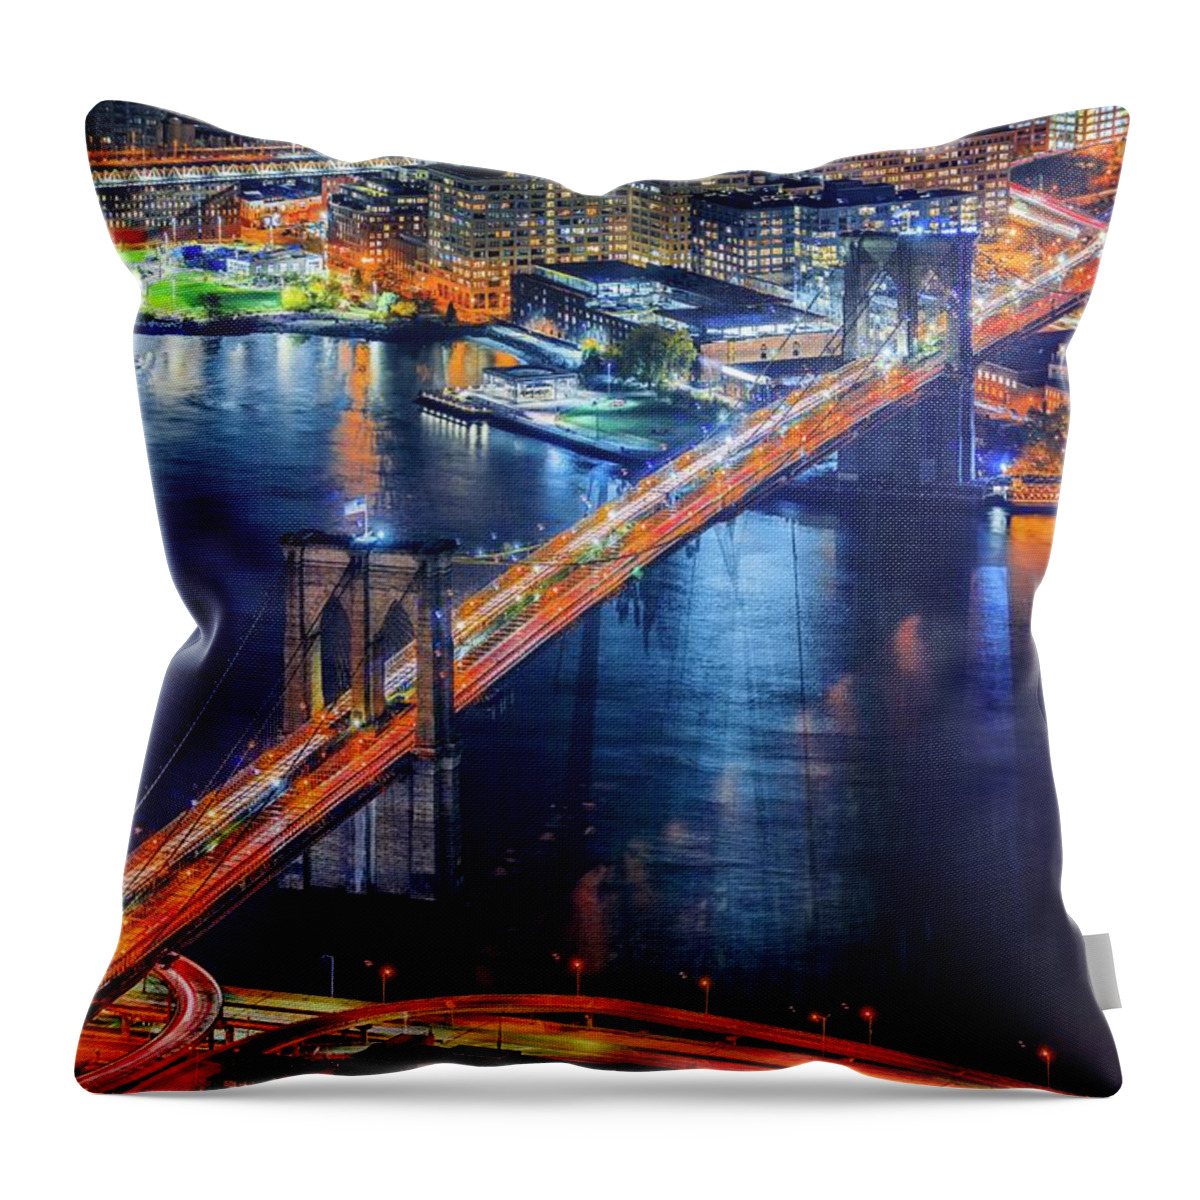 Estock Throw Pillow featuring the digital art New York City, East River, Manhattan, Brooklyn Bridge, Stunning View From The Freedom Tower Observatory Deck - One World Observatory by Antonino Bartuccio